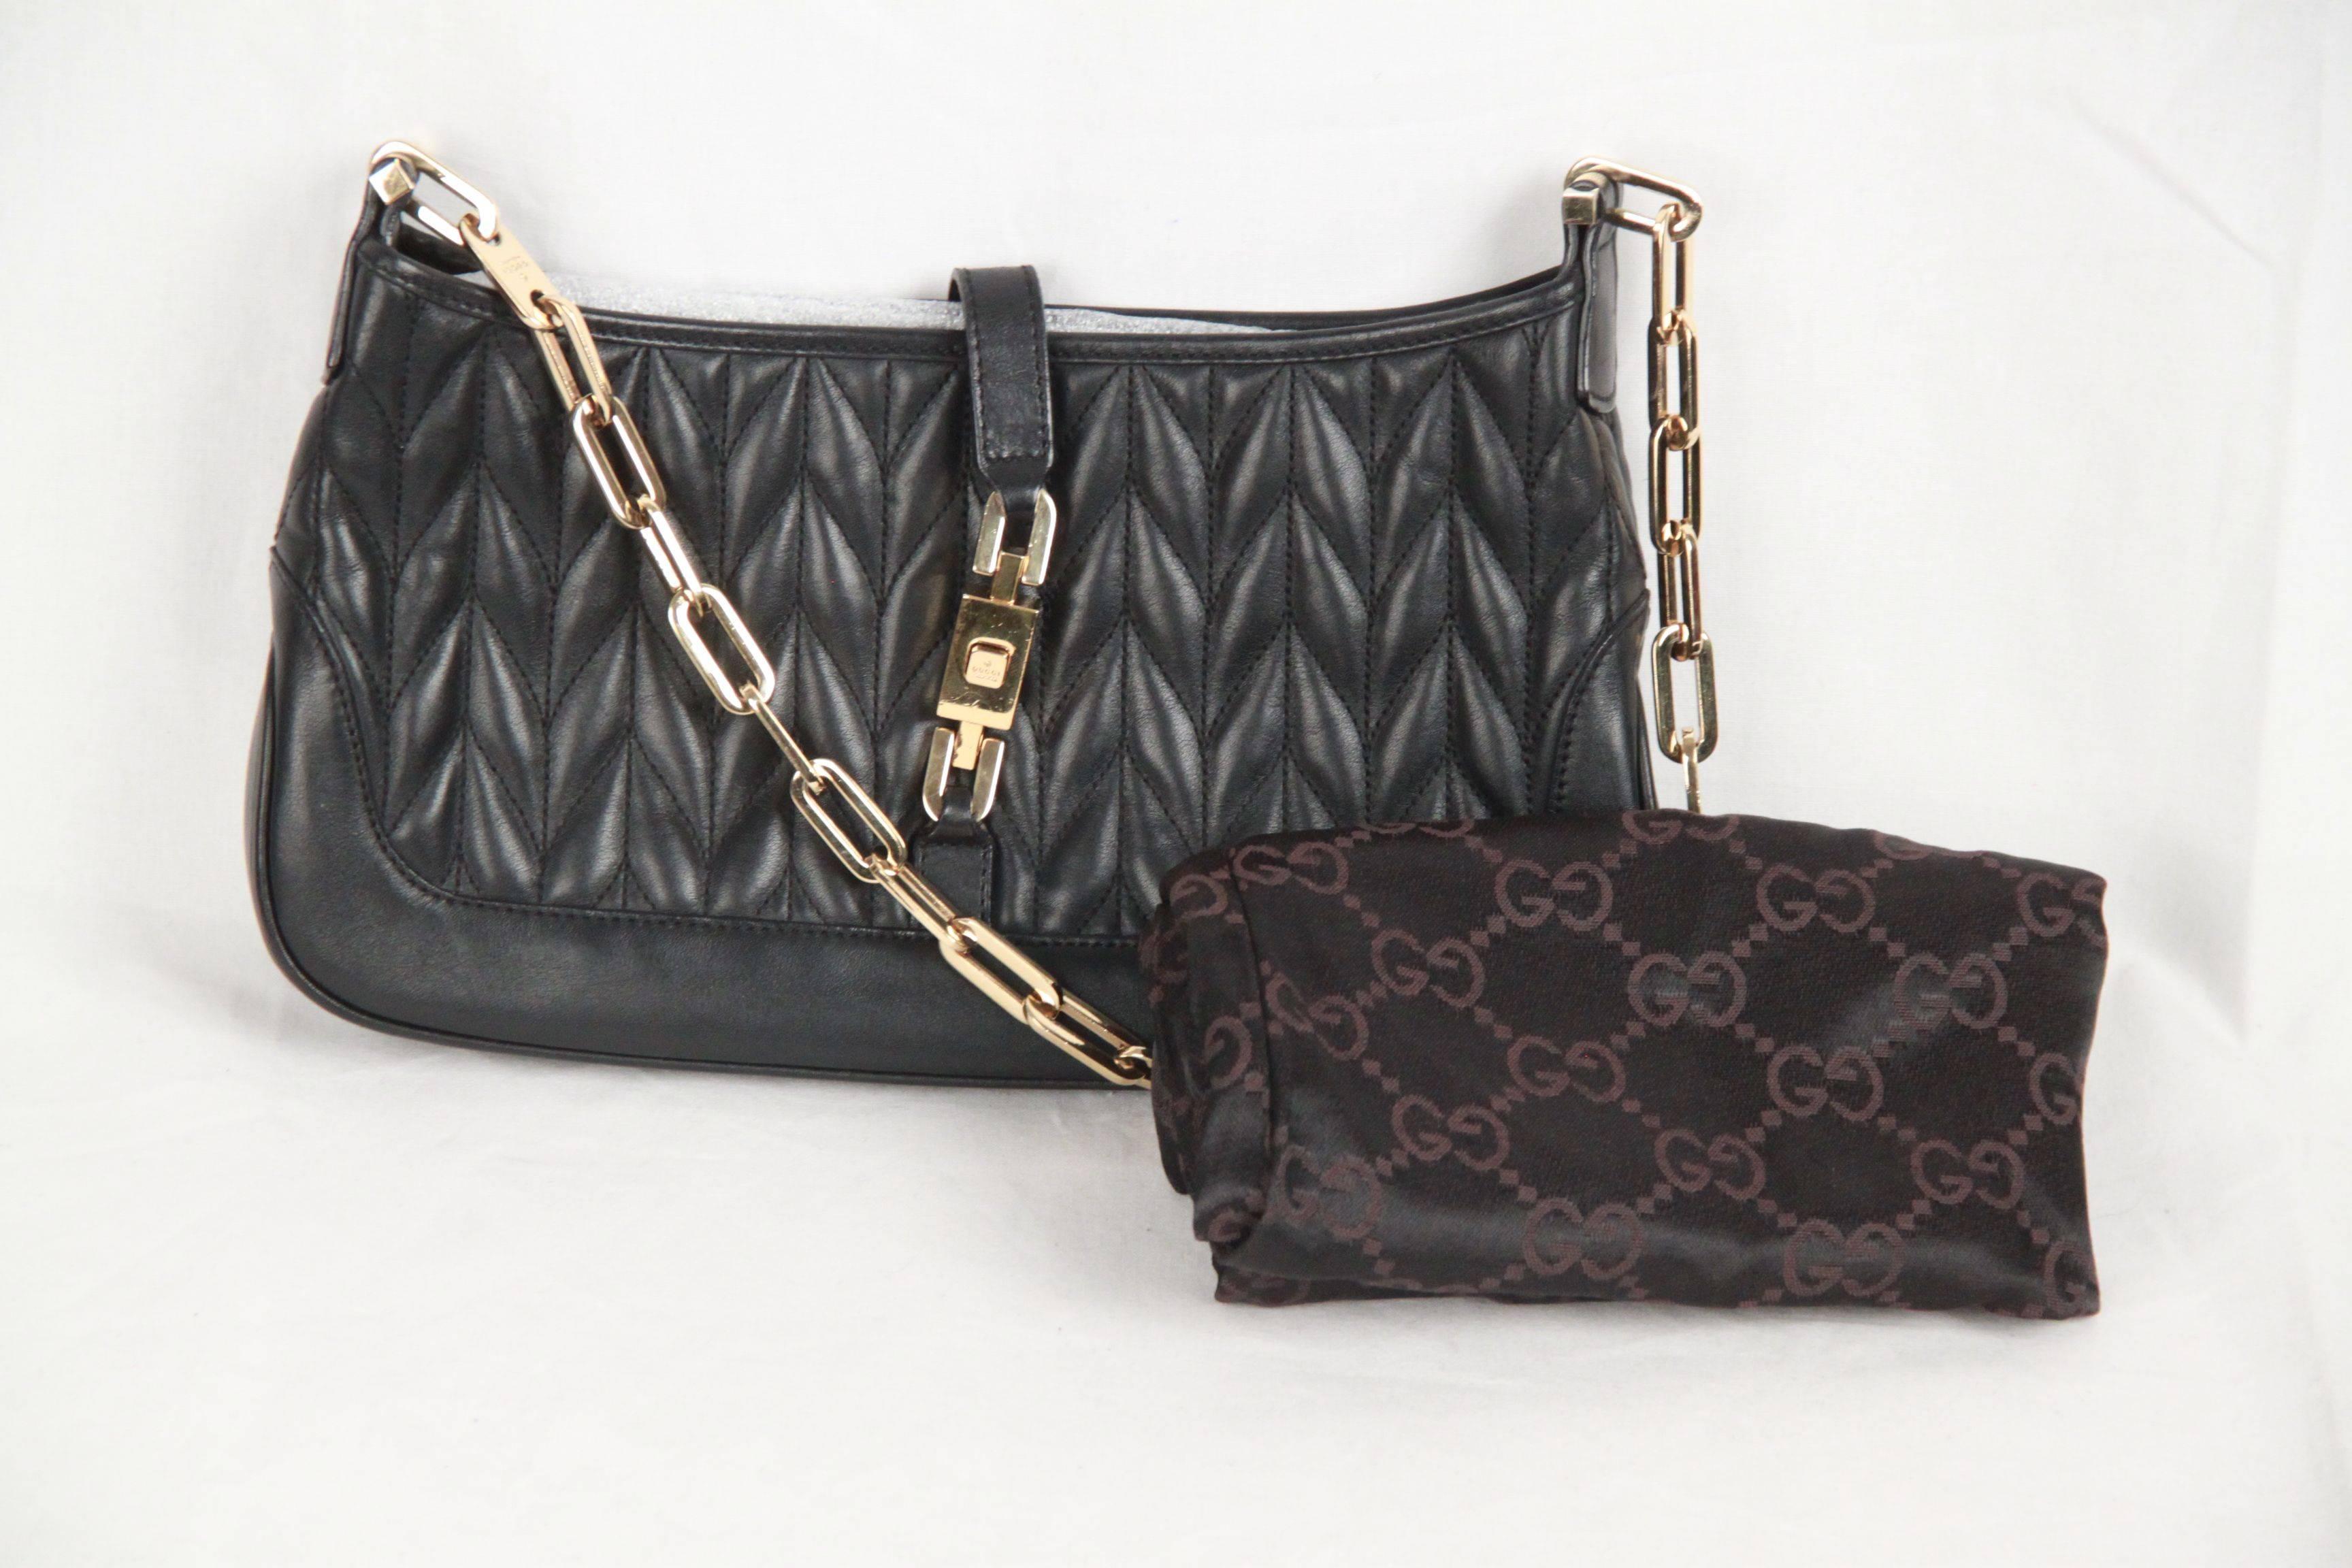 - Black quilted leather 
- Gold metal hardware and chain strap
- Fold-over strap with push closure on the front
- Black fabric lining
- 1 side zip pocket inside
- Measurements (height x length x depth): 6 x 10 1/2 x 1 1/2 inches - 15,2 x 26,7x 3,8